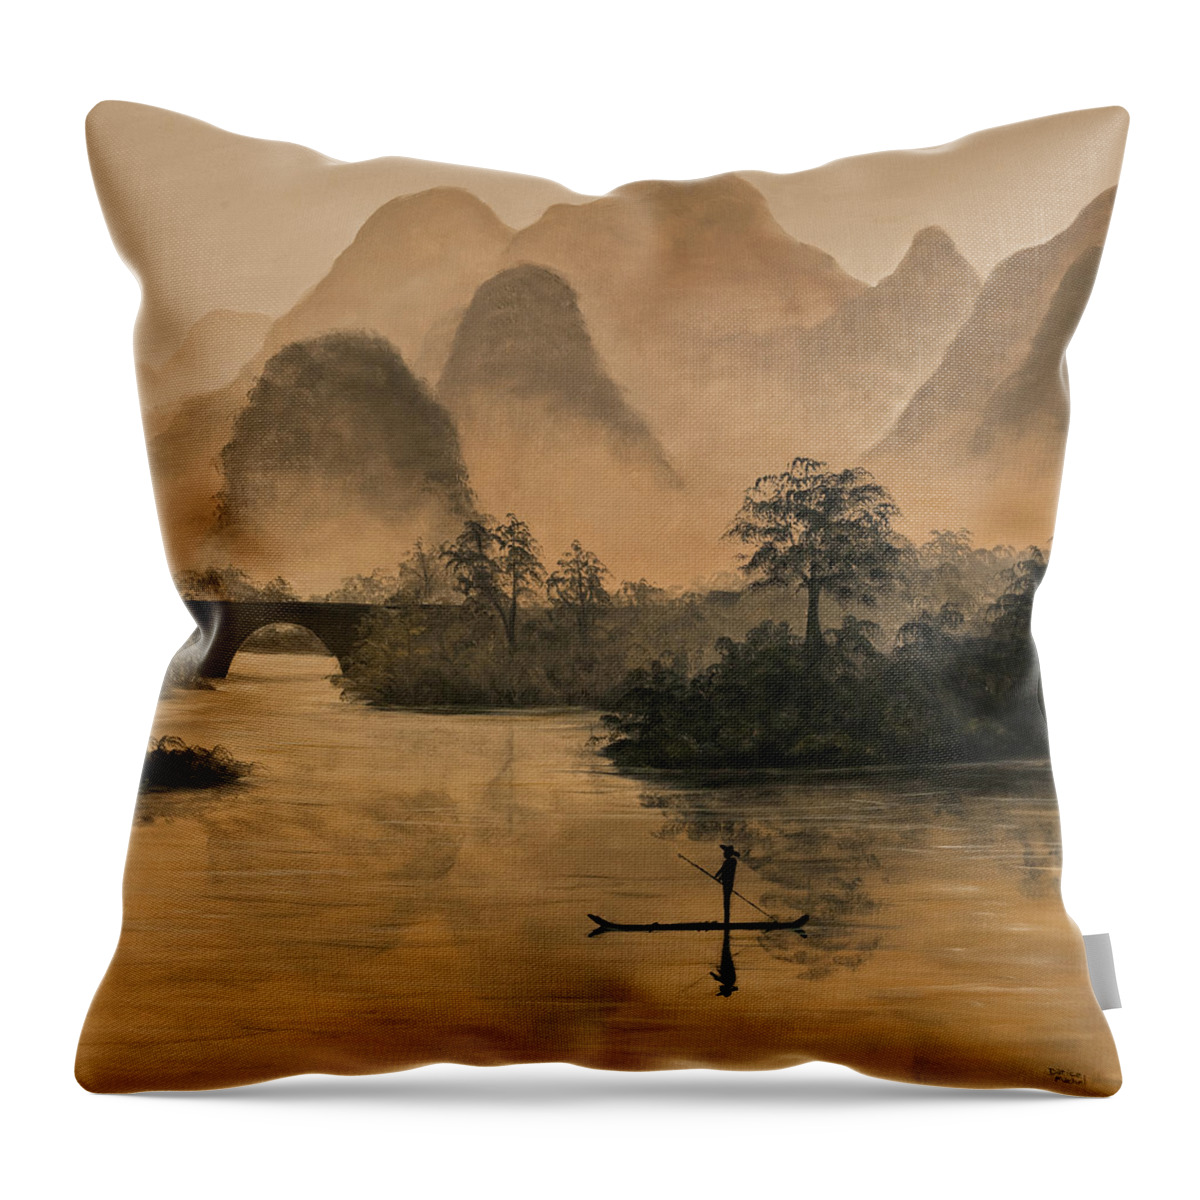 River Throw Pillow featuring the painting Li River China by Darice Machel McGuire